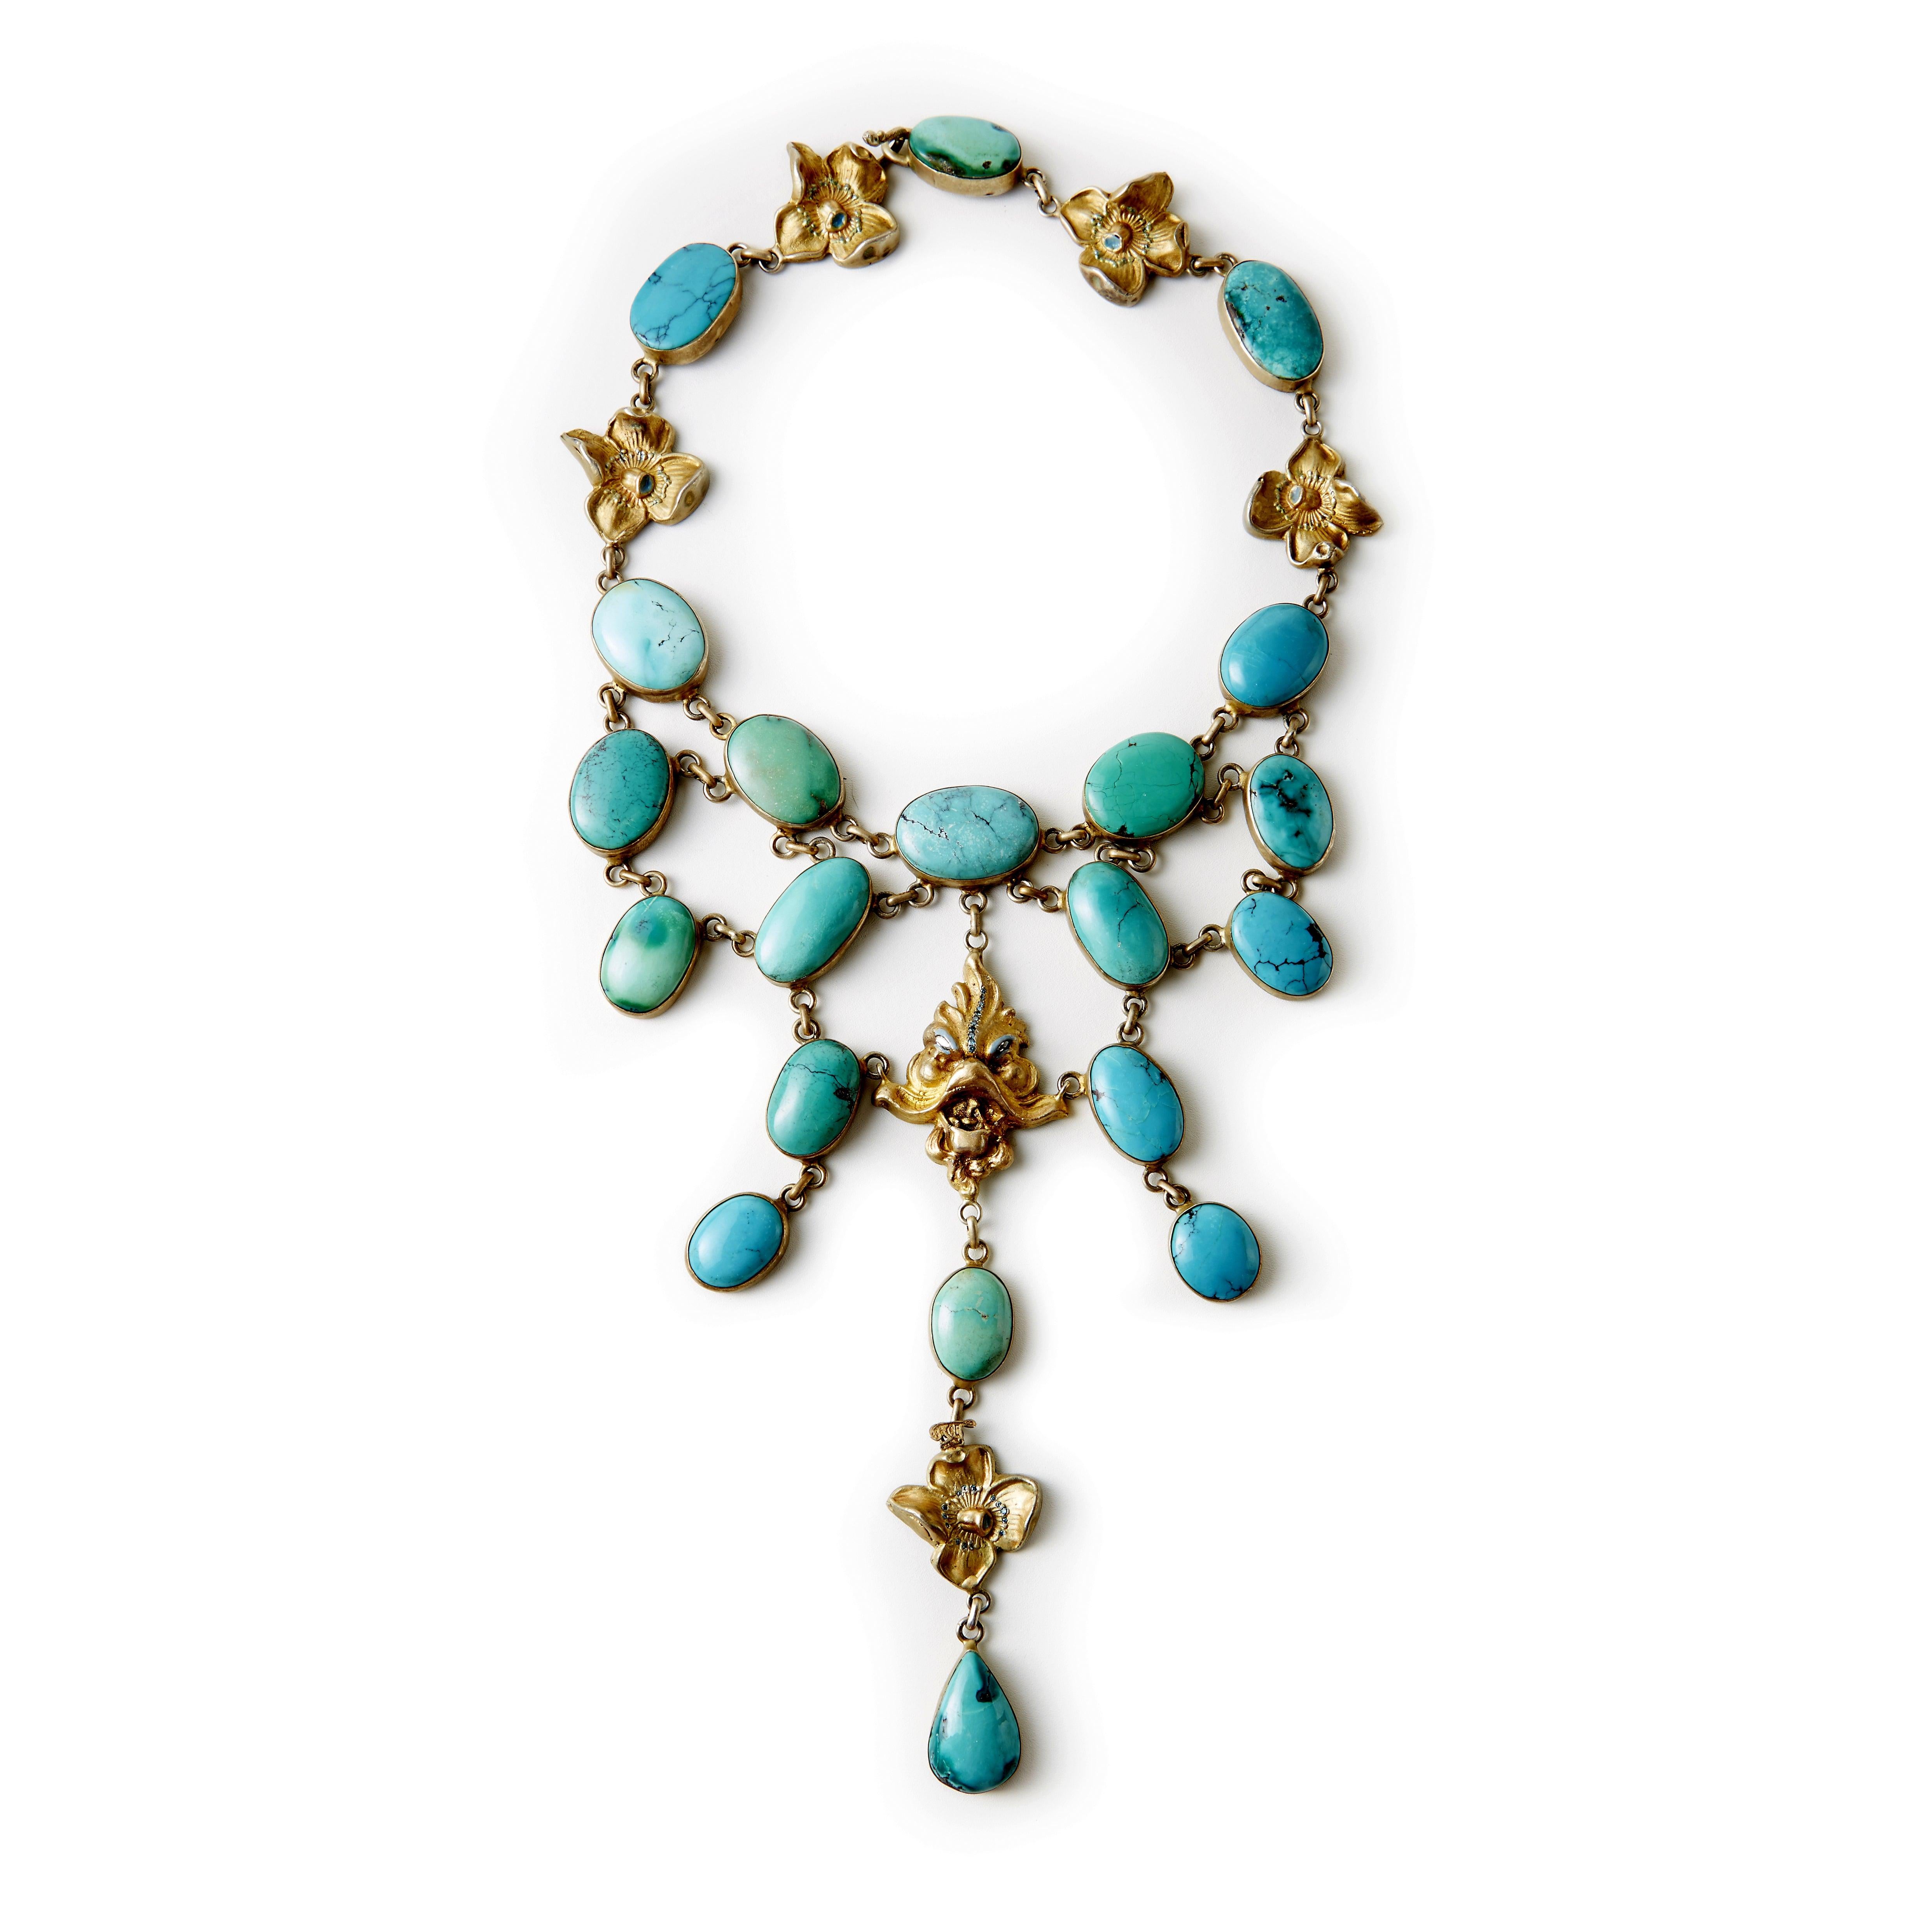 Erin Mac Original - Antique Style Goddess Face and Flowers in silver gilt, set between Turquoise cabochons, some pieces sprinkled with treated Blue Diamonds. Very comfy flexible-designed Stylish Necklace . 